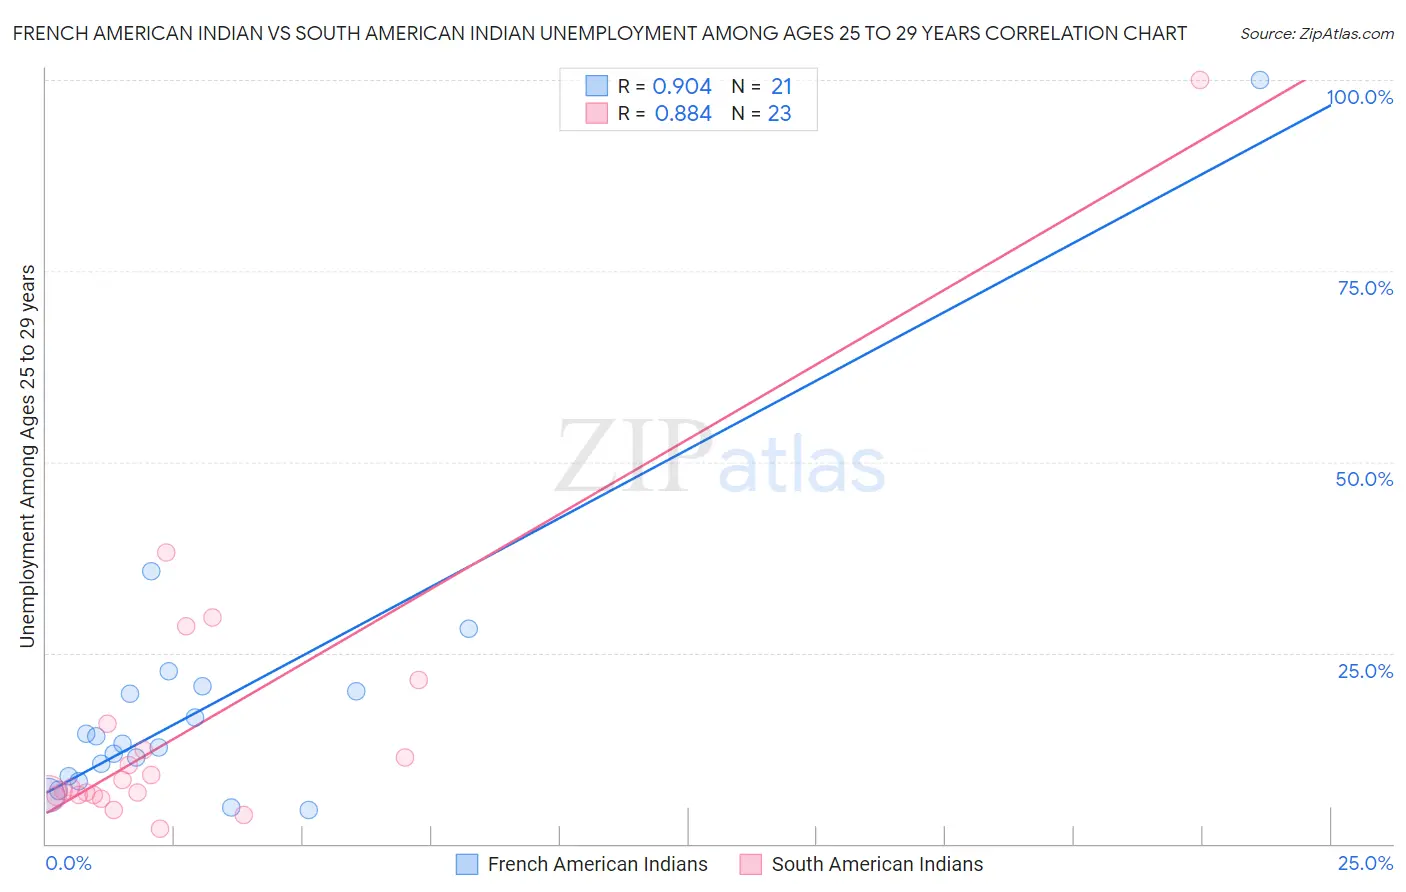 French American Indian vs South American Indian Unemployment Among Ages 25 to 29 years